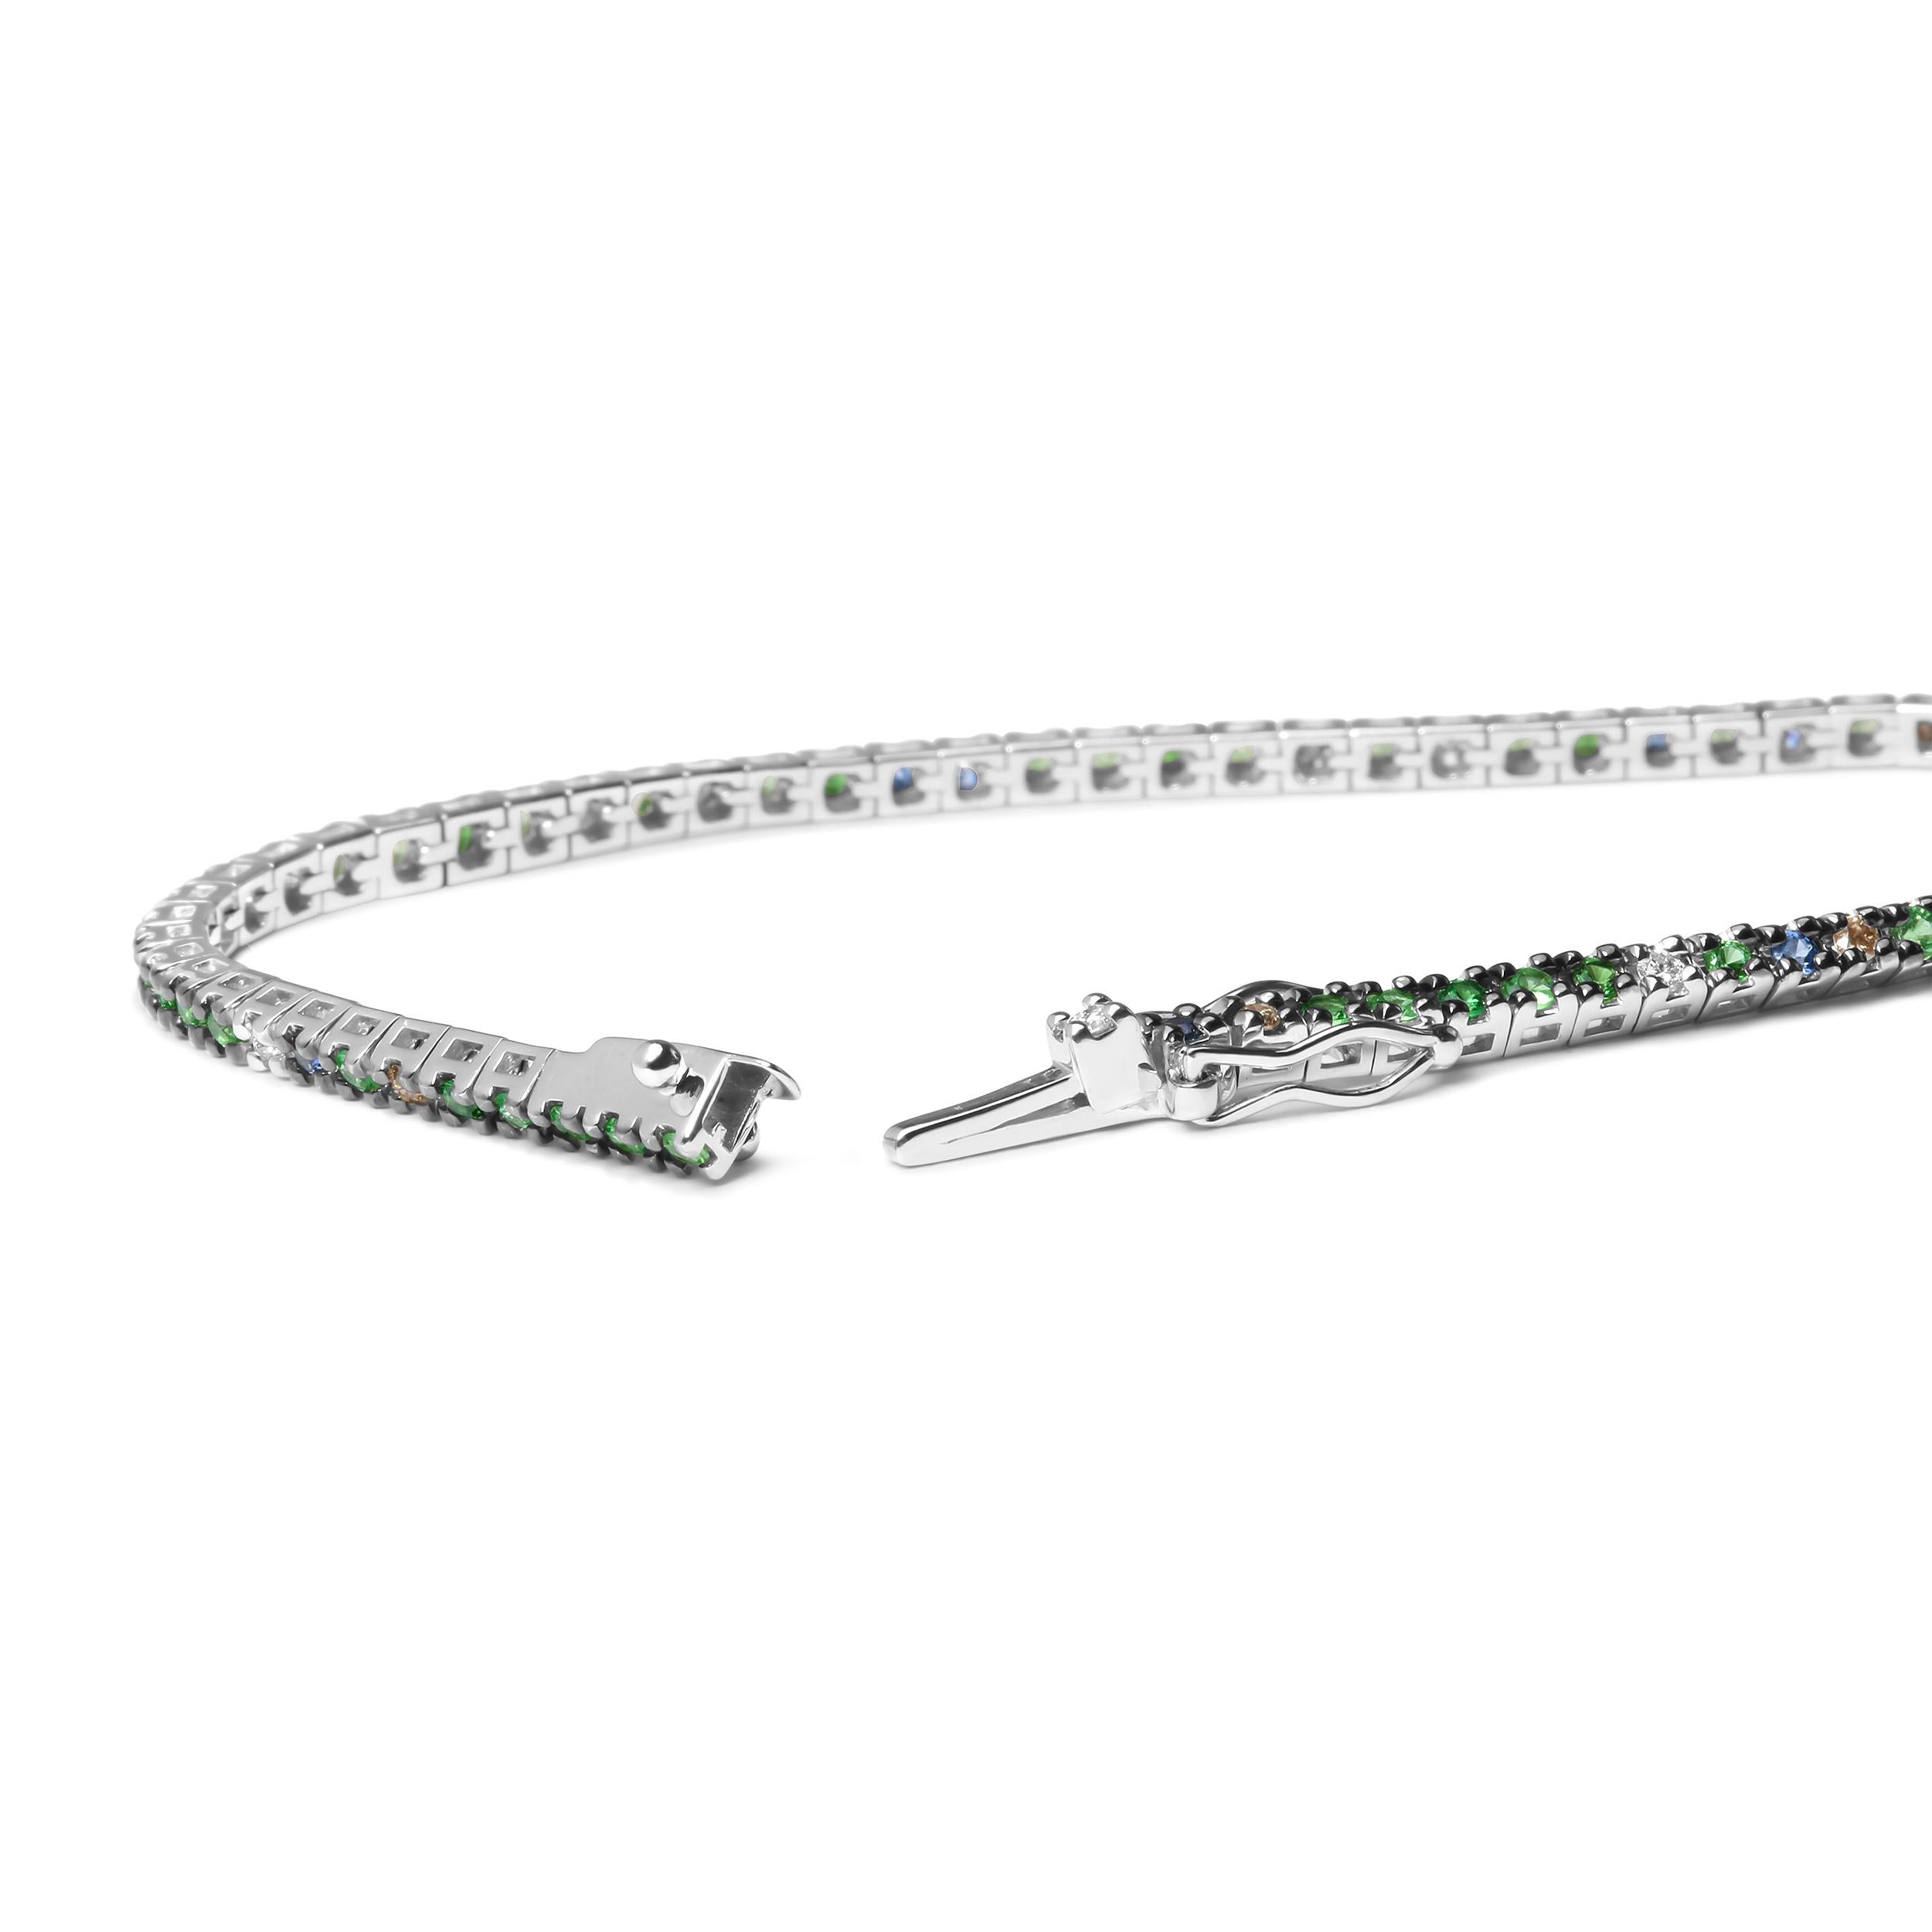 This 18k white gold tennis bracelet is a stunning piece that is perfect to pair with any outfit choice. An array of colorful diamonds and gemstones enhance the look and give it a unique flair that you will love to show off.  Round white diamonds and